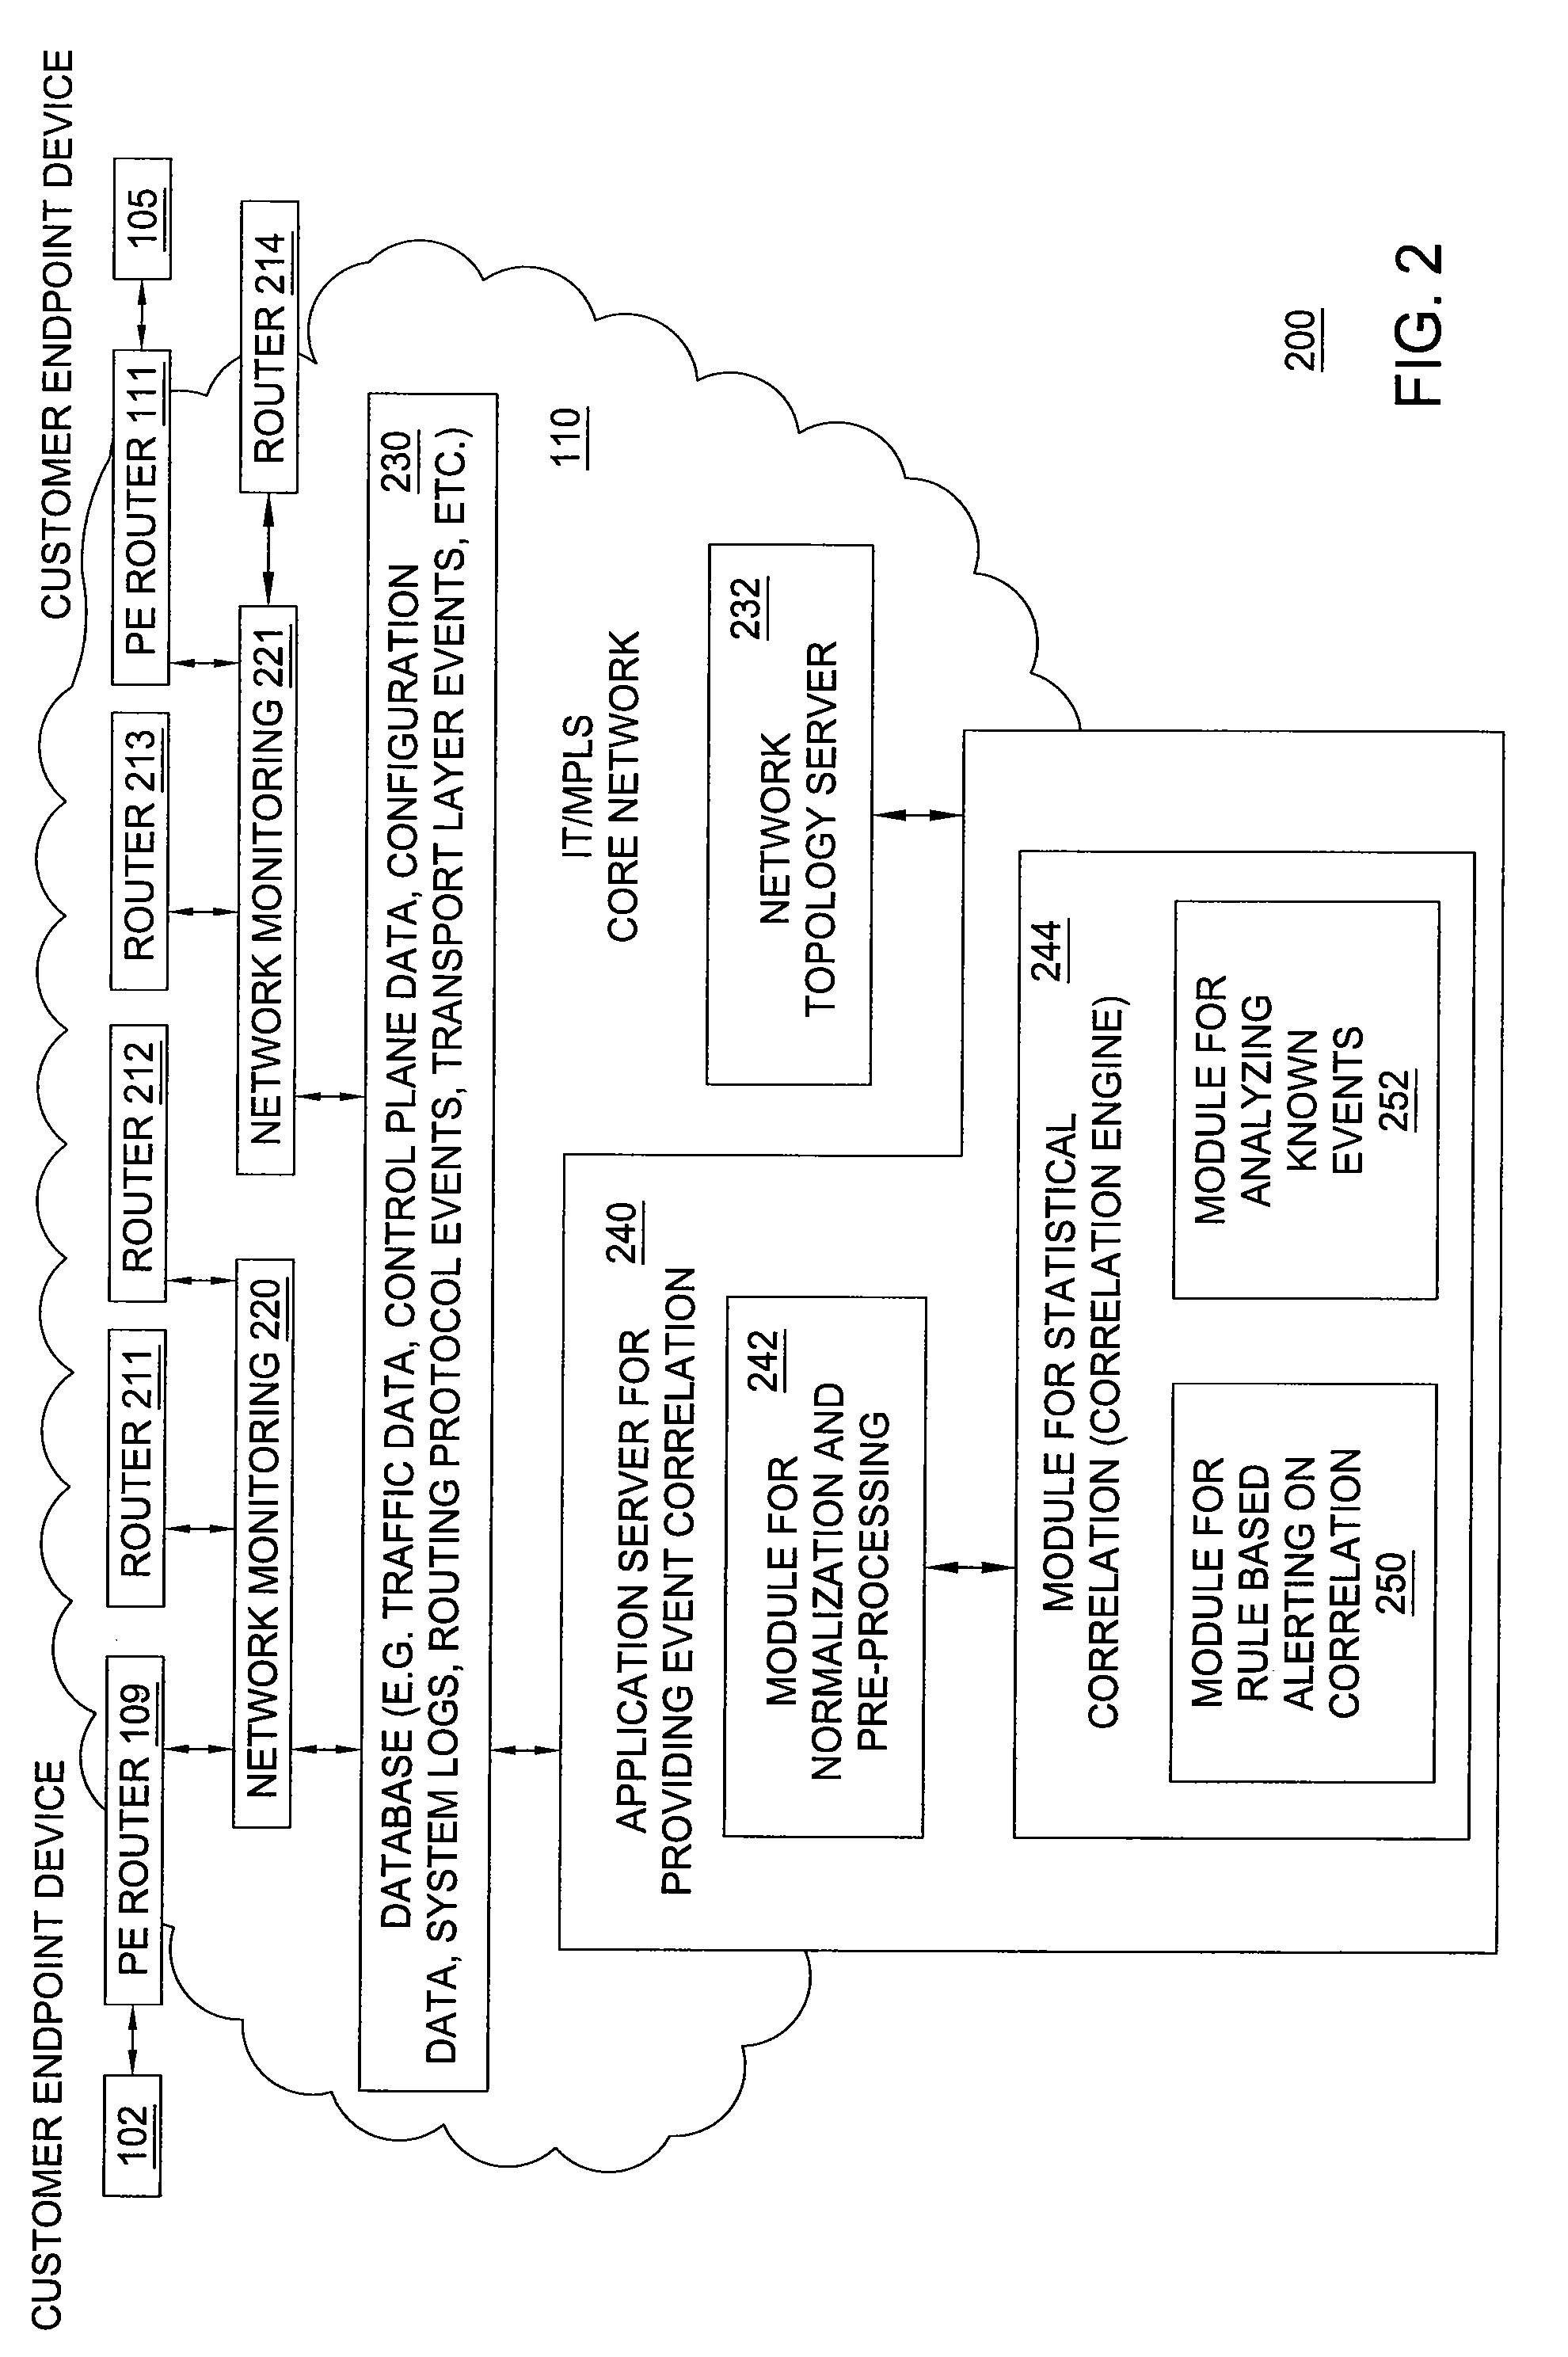 Method and apparatus for providing statistical event correlation in a network